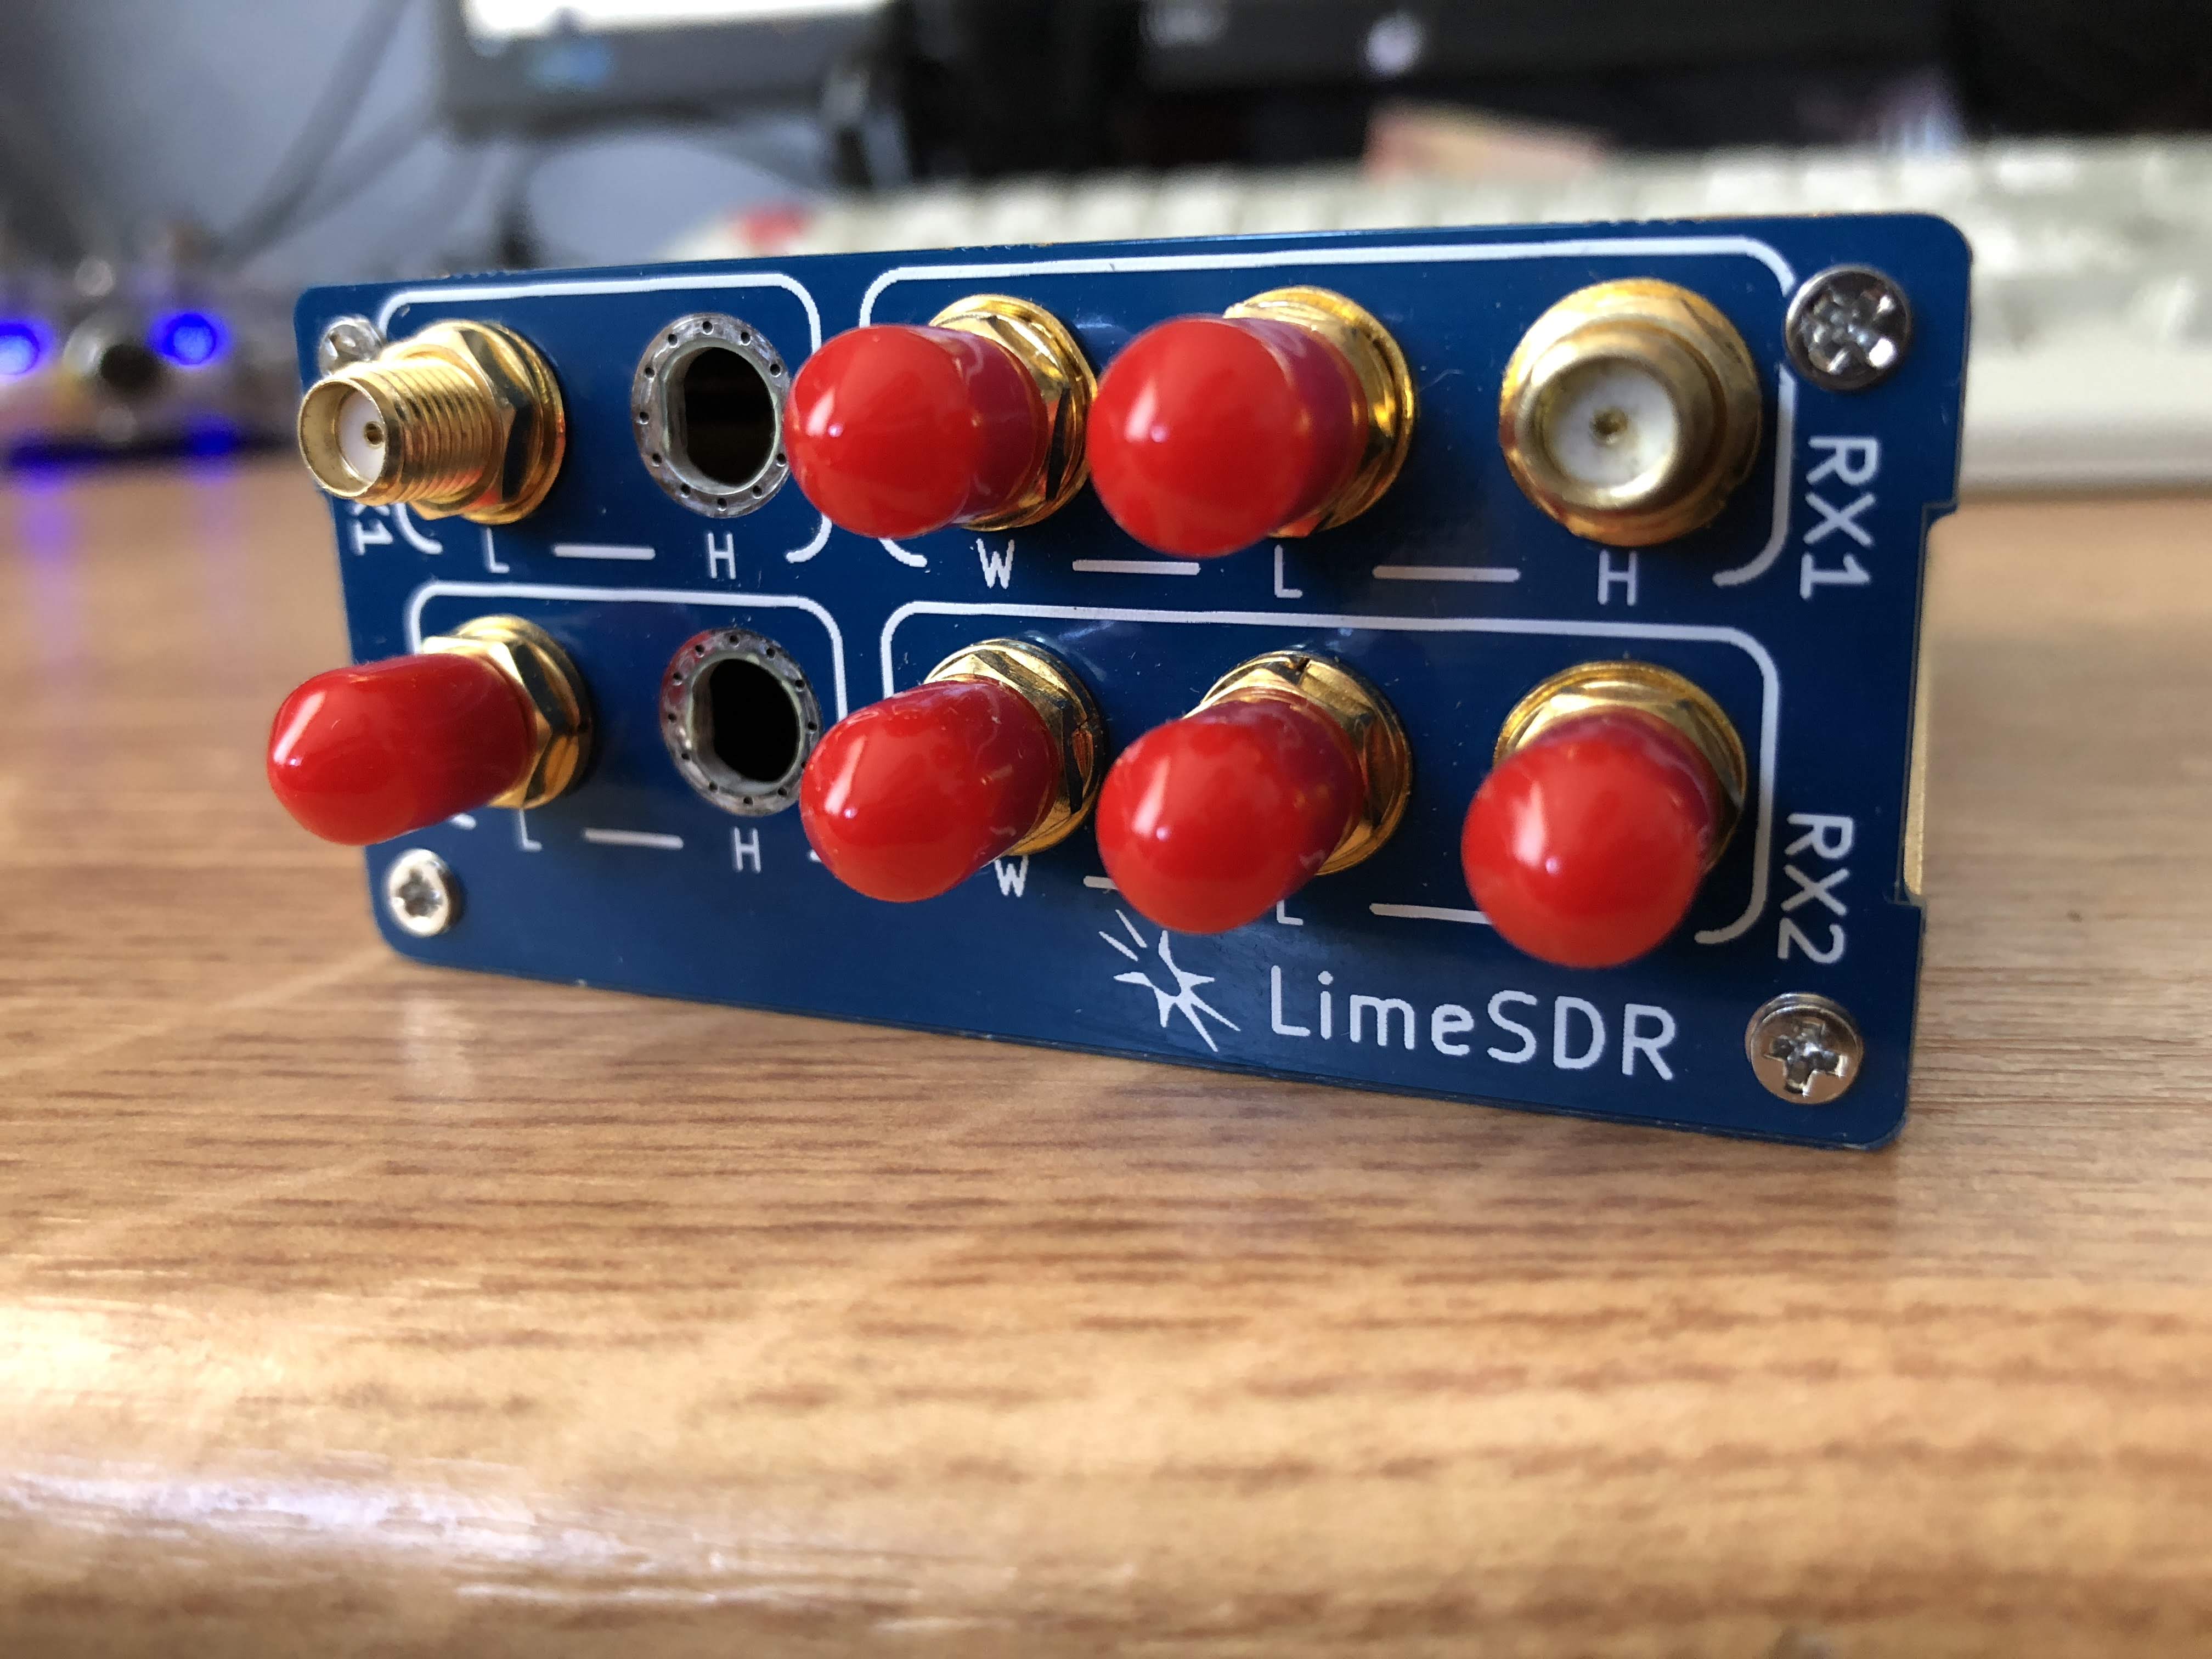 LimeSDR with 2 SMA connectors missing